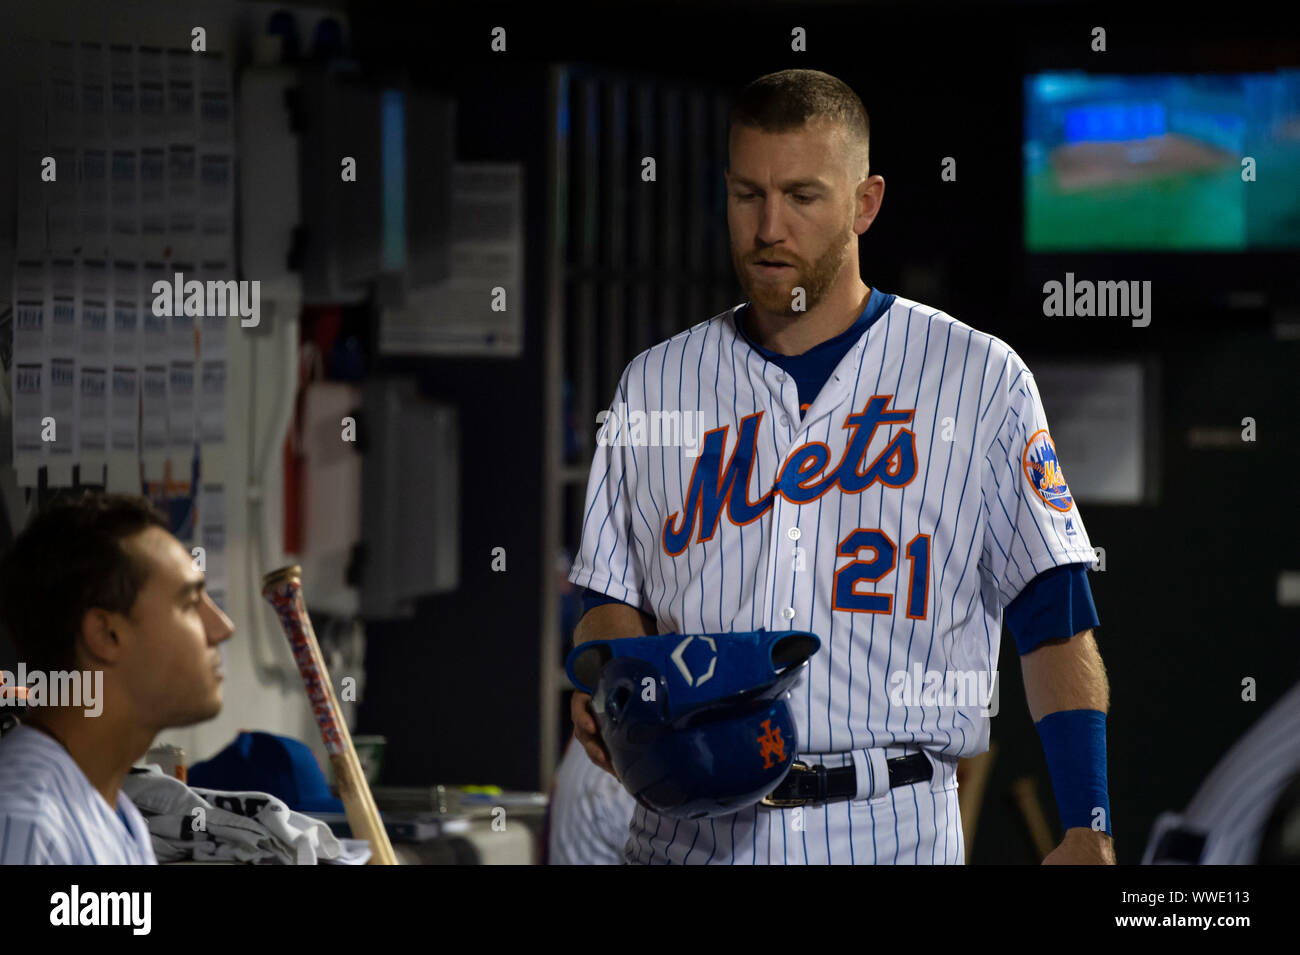 Queens, New York, USA. 13th Sep, 2019. New York Mets third baseman Todd Frazier (21) grabs his helmet in the dugout during the game between The New York Mets and The Los Angeles Dodgers at Citi Field in Queens, New York. Mandatory credit: Kostas Lymperopoulos/CSM/Alamy Live News Stock Photo